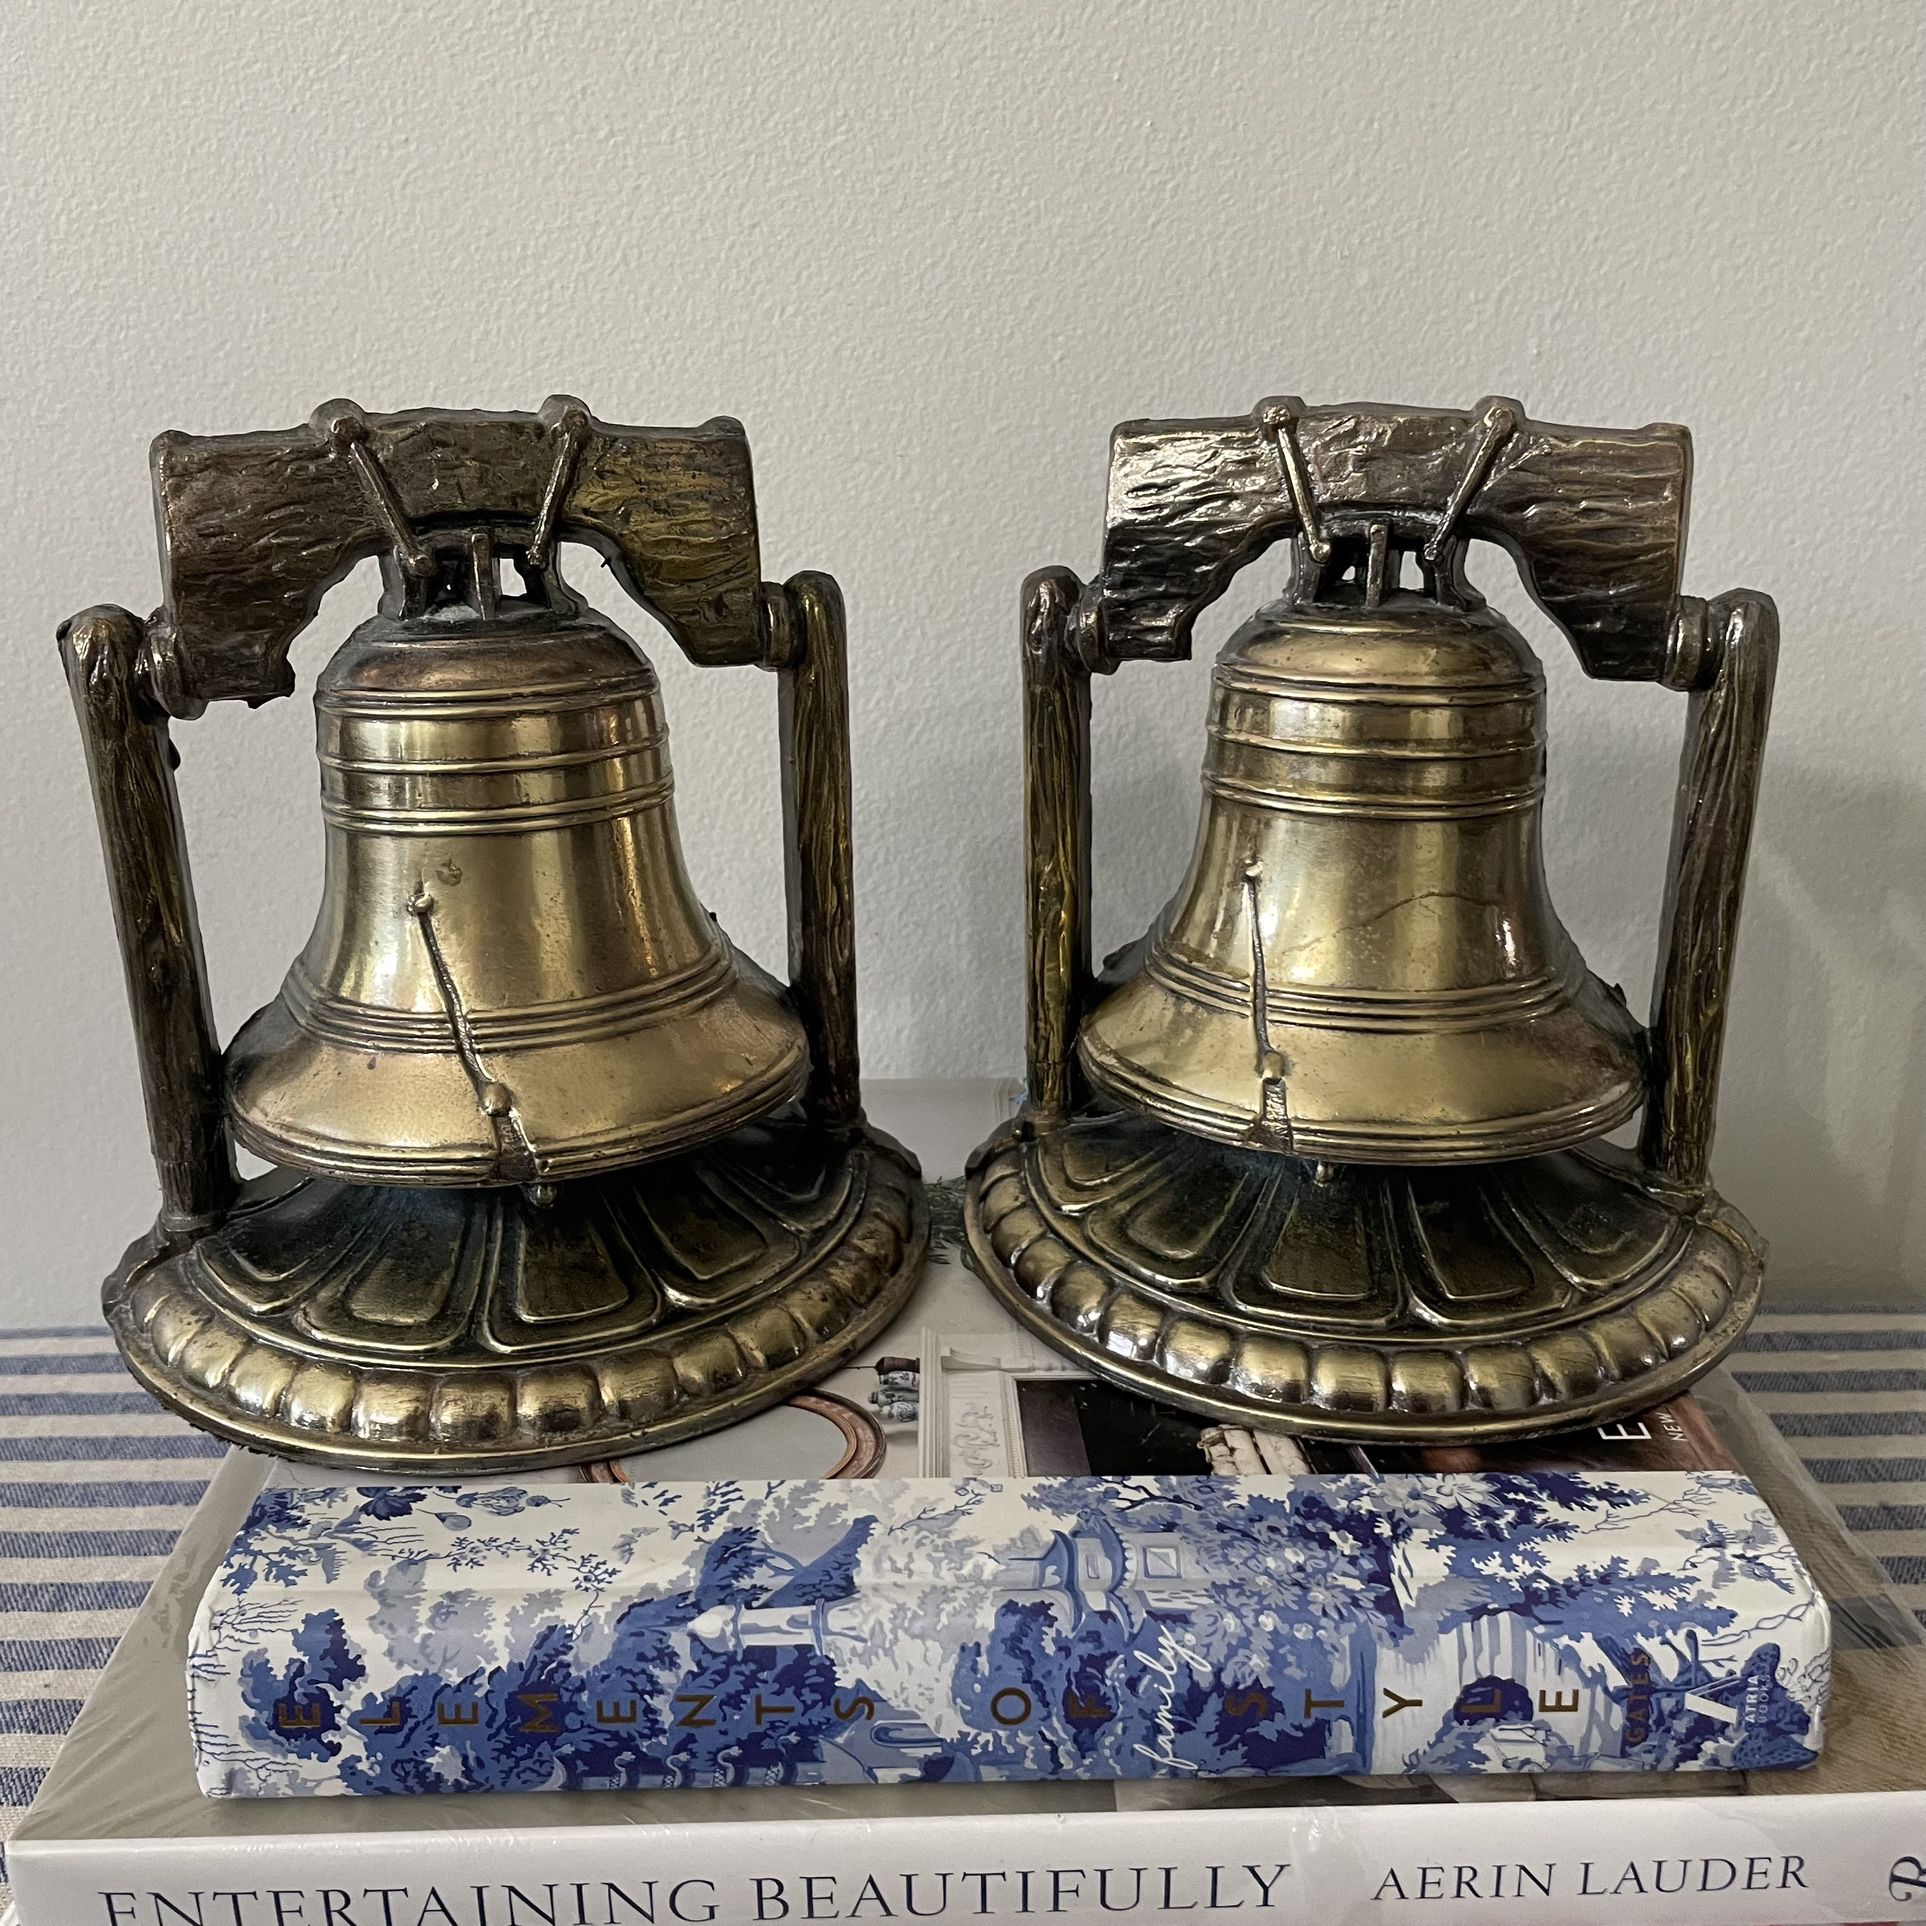 1974 SCC Cast Antique Brass Liberty Bell Bookends (Made in the U.S.A.) – Pair